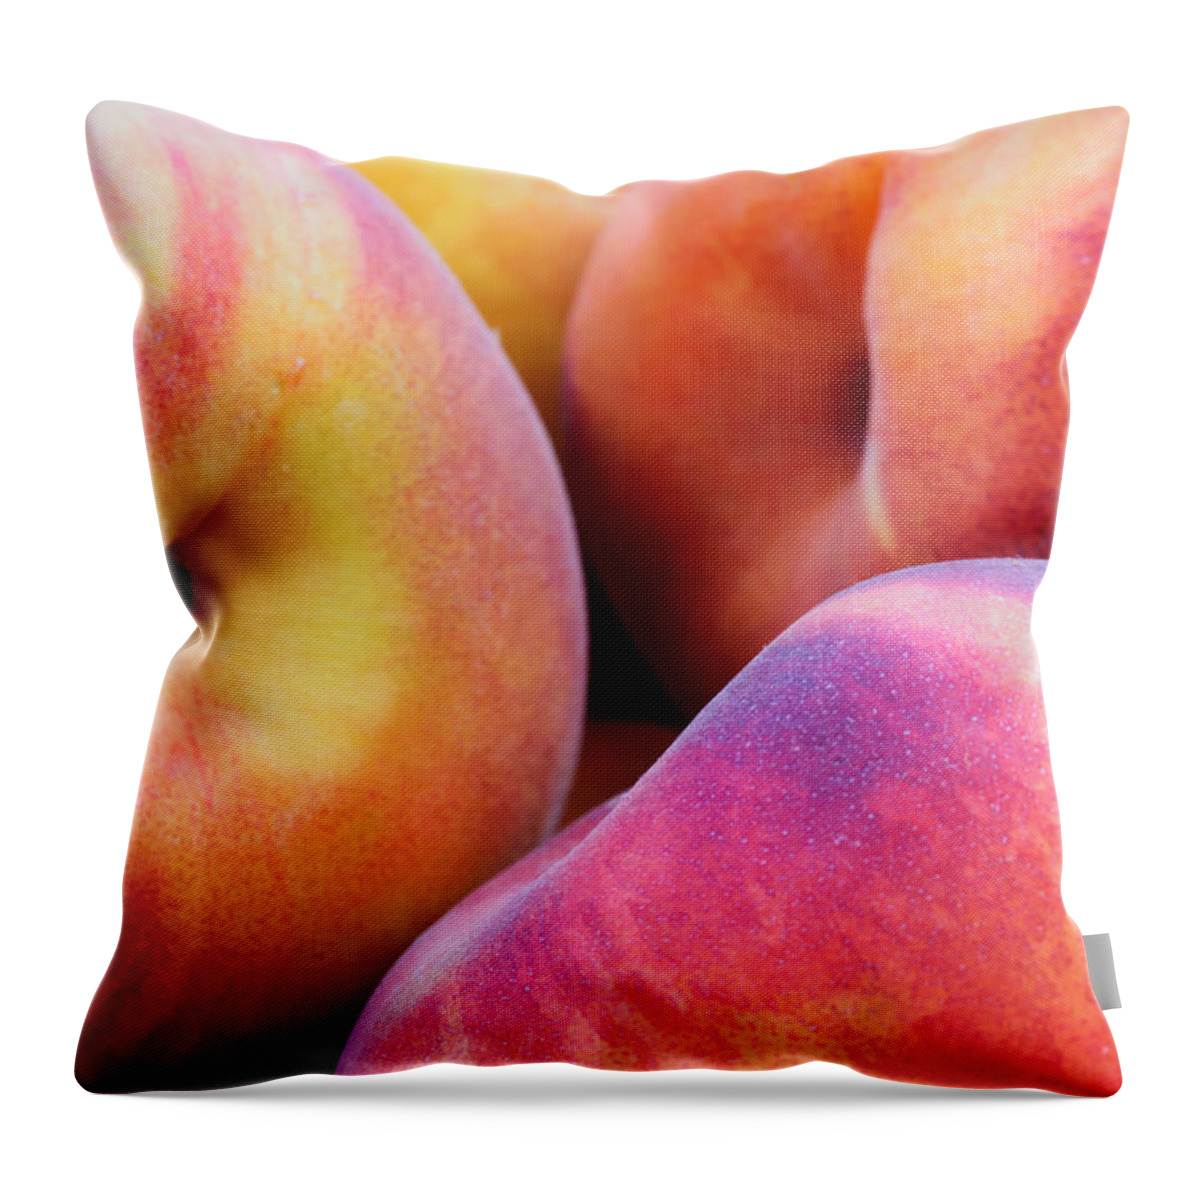 Agriculture Throw Pillow featuring the photograph Perfectly Peachy by Heidi Smith